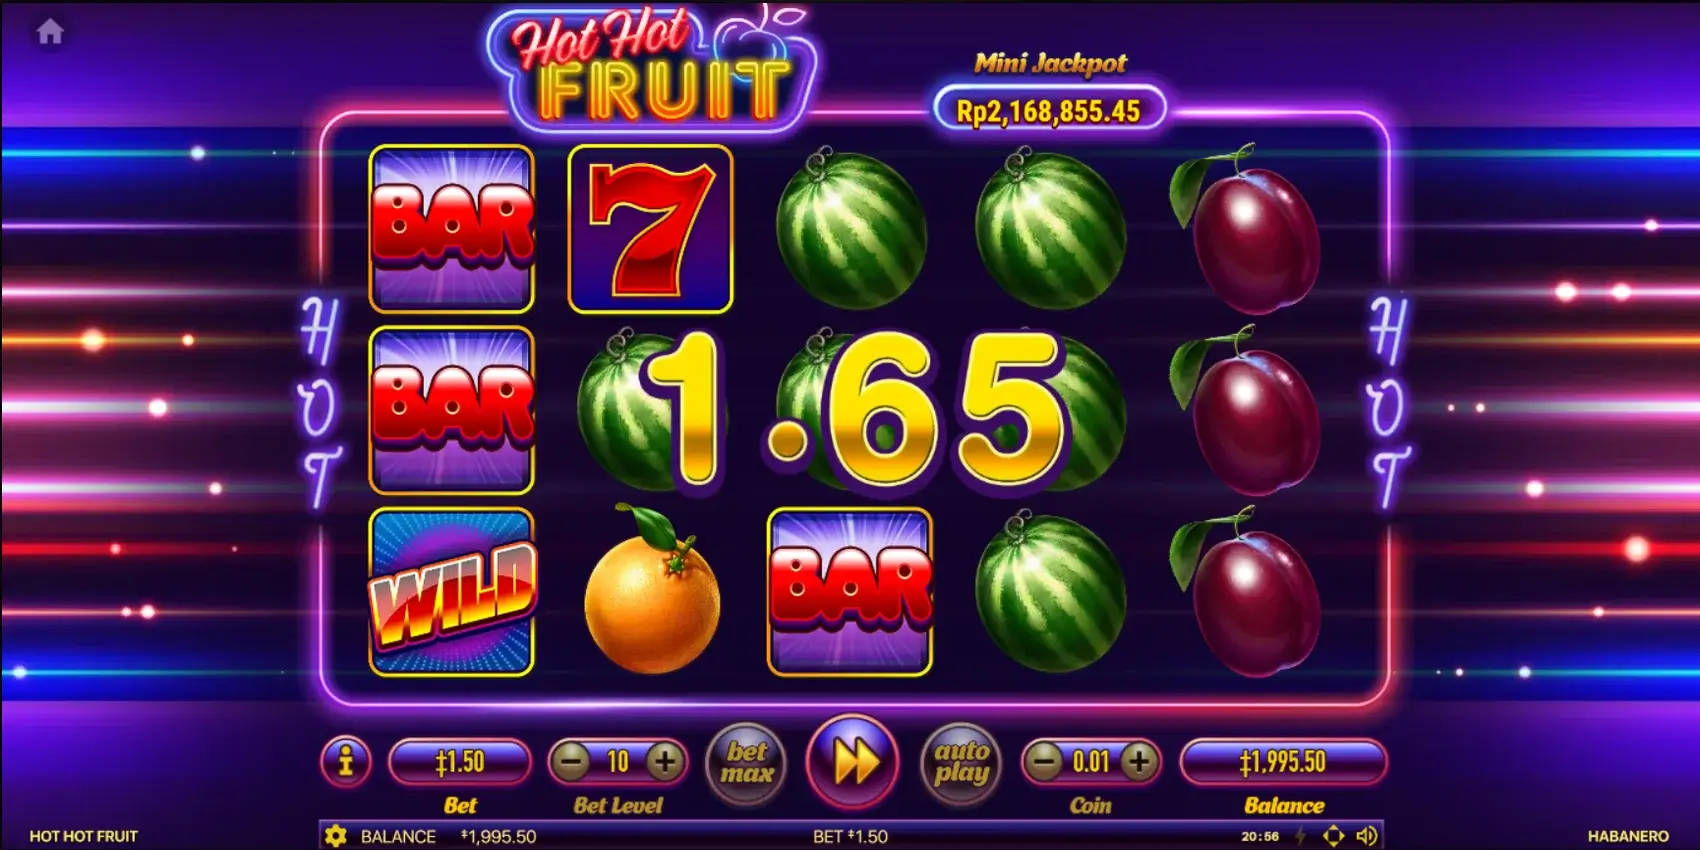 Play the Hot Hot slot for real money and win